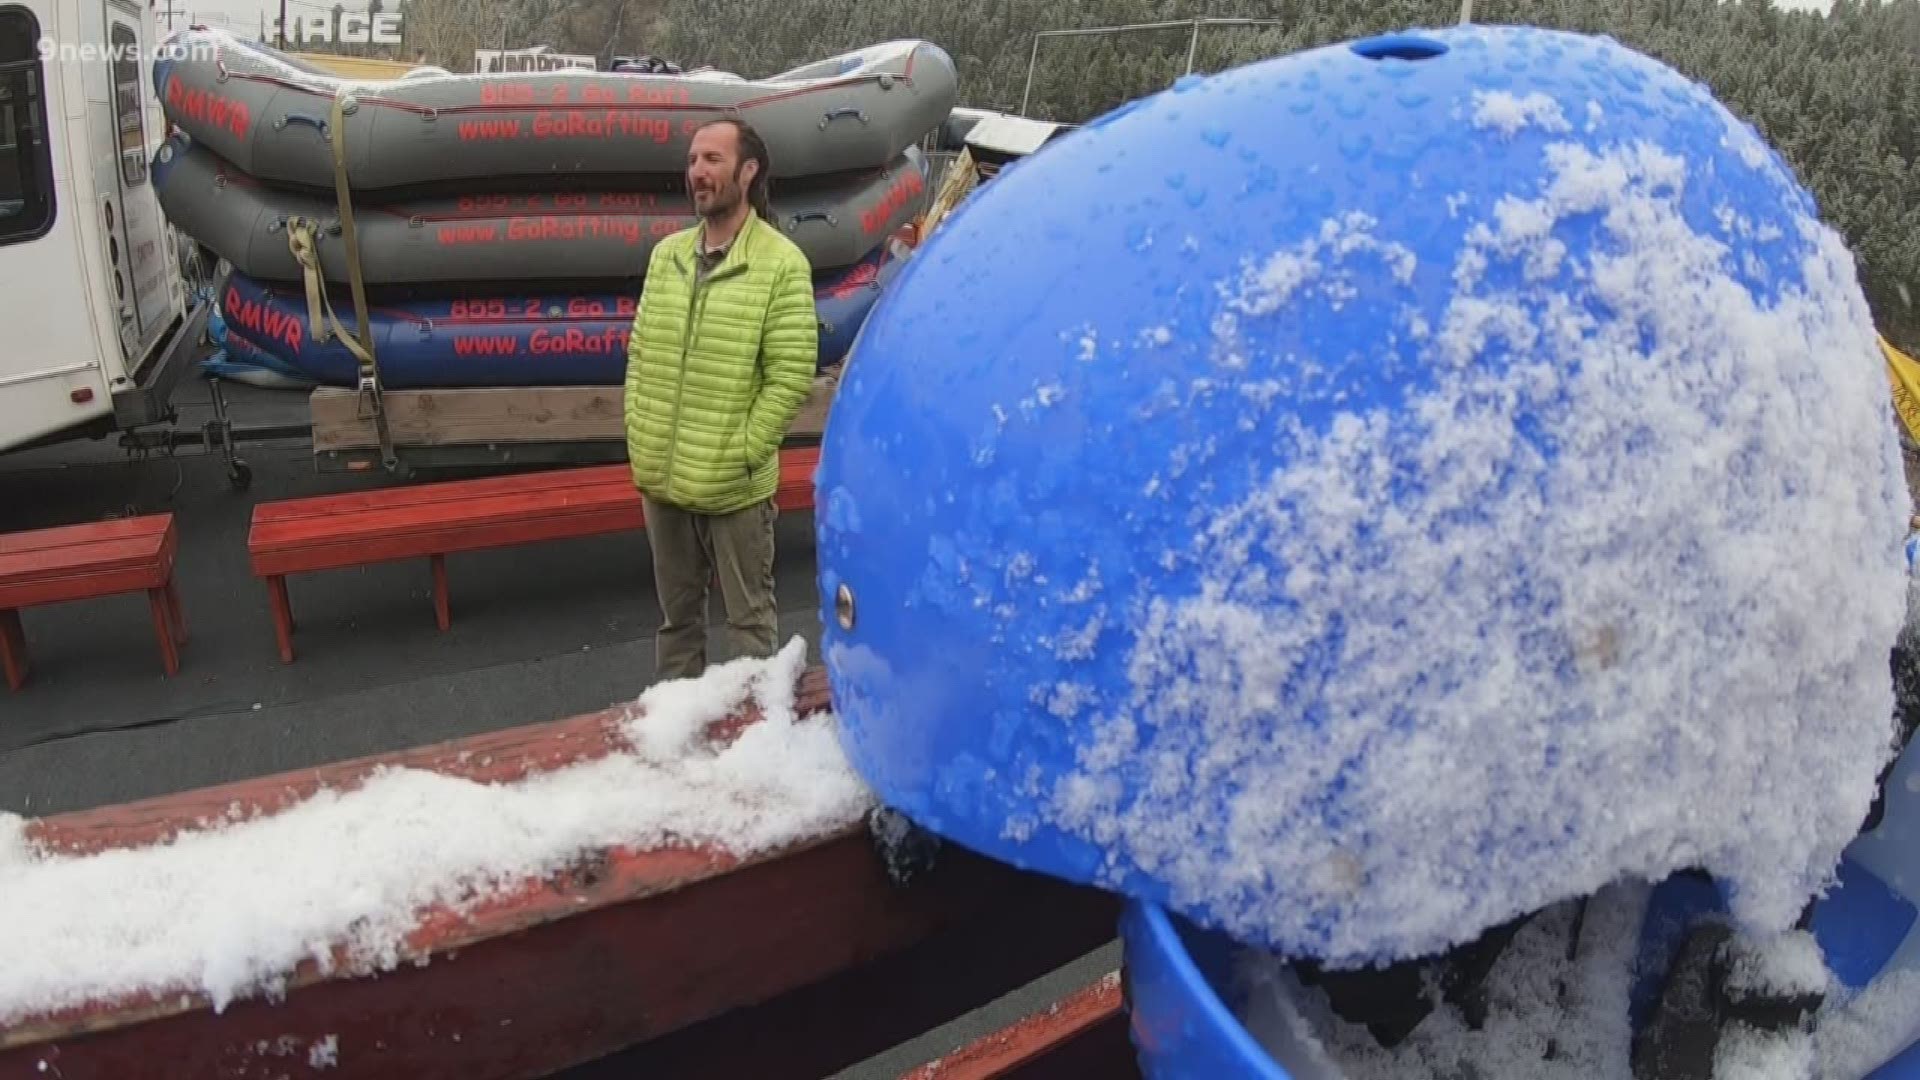 The river rafting season is off to a late start thanks to the late snowfall. However, all that snowpack could mean the season will run longer into the late summer.